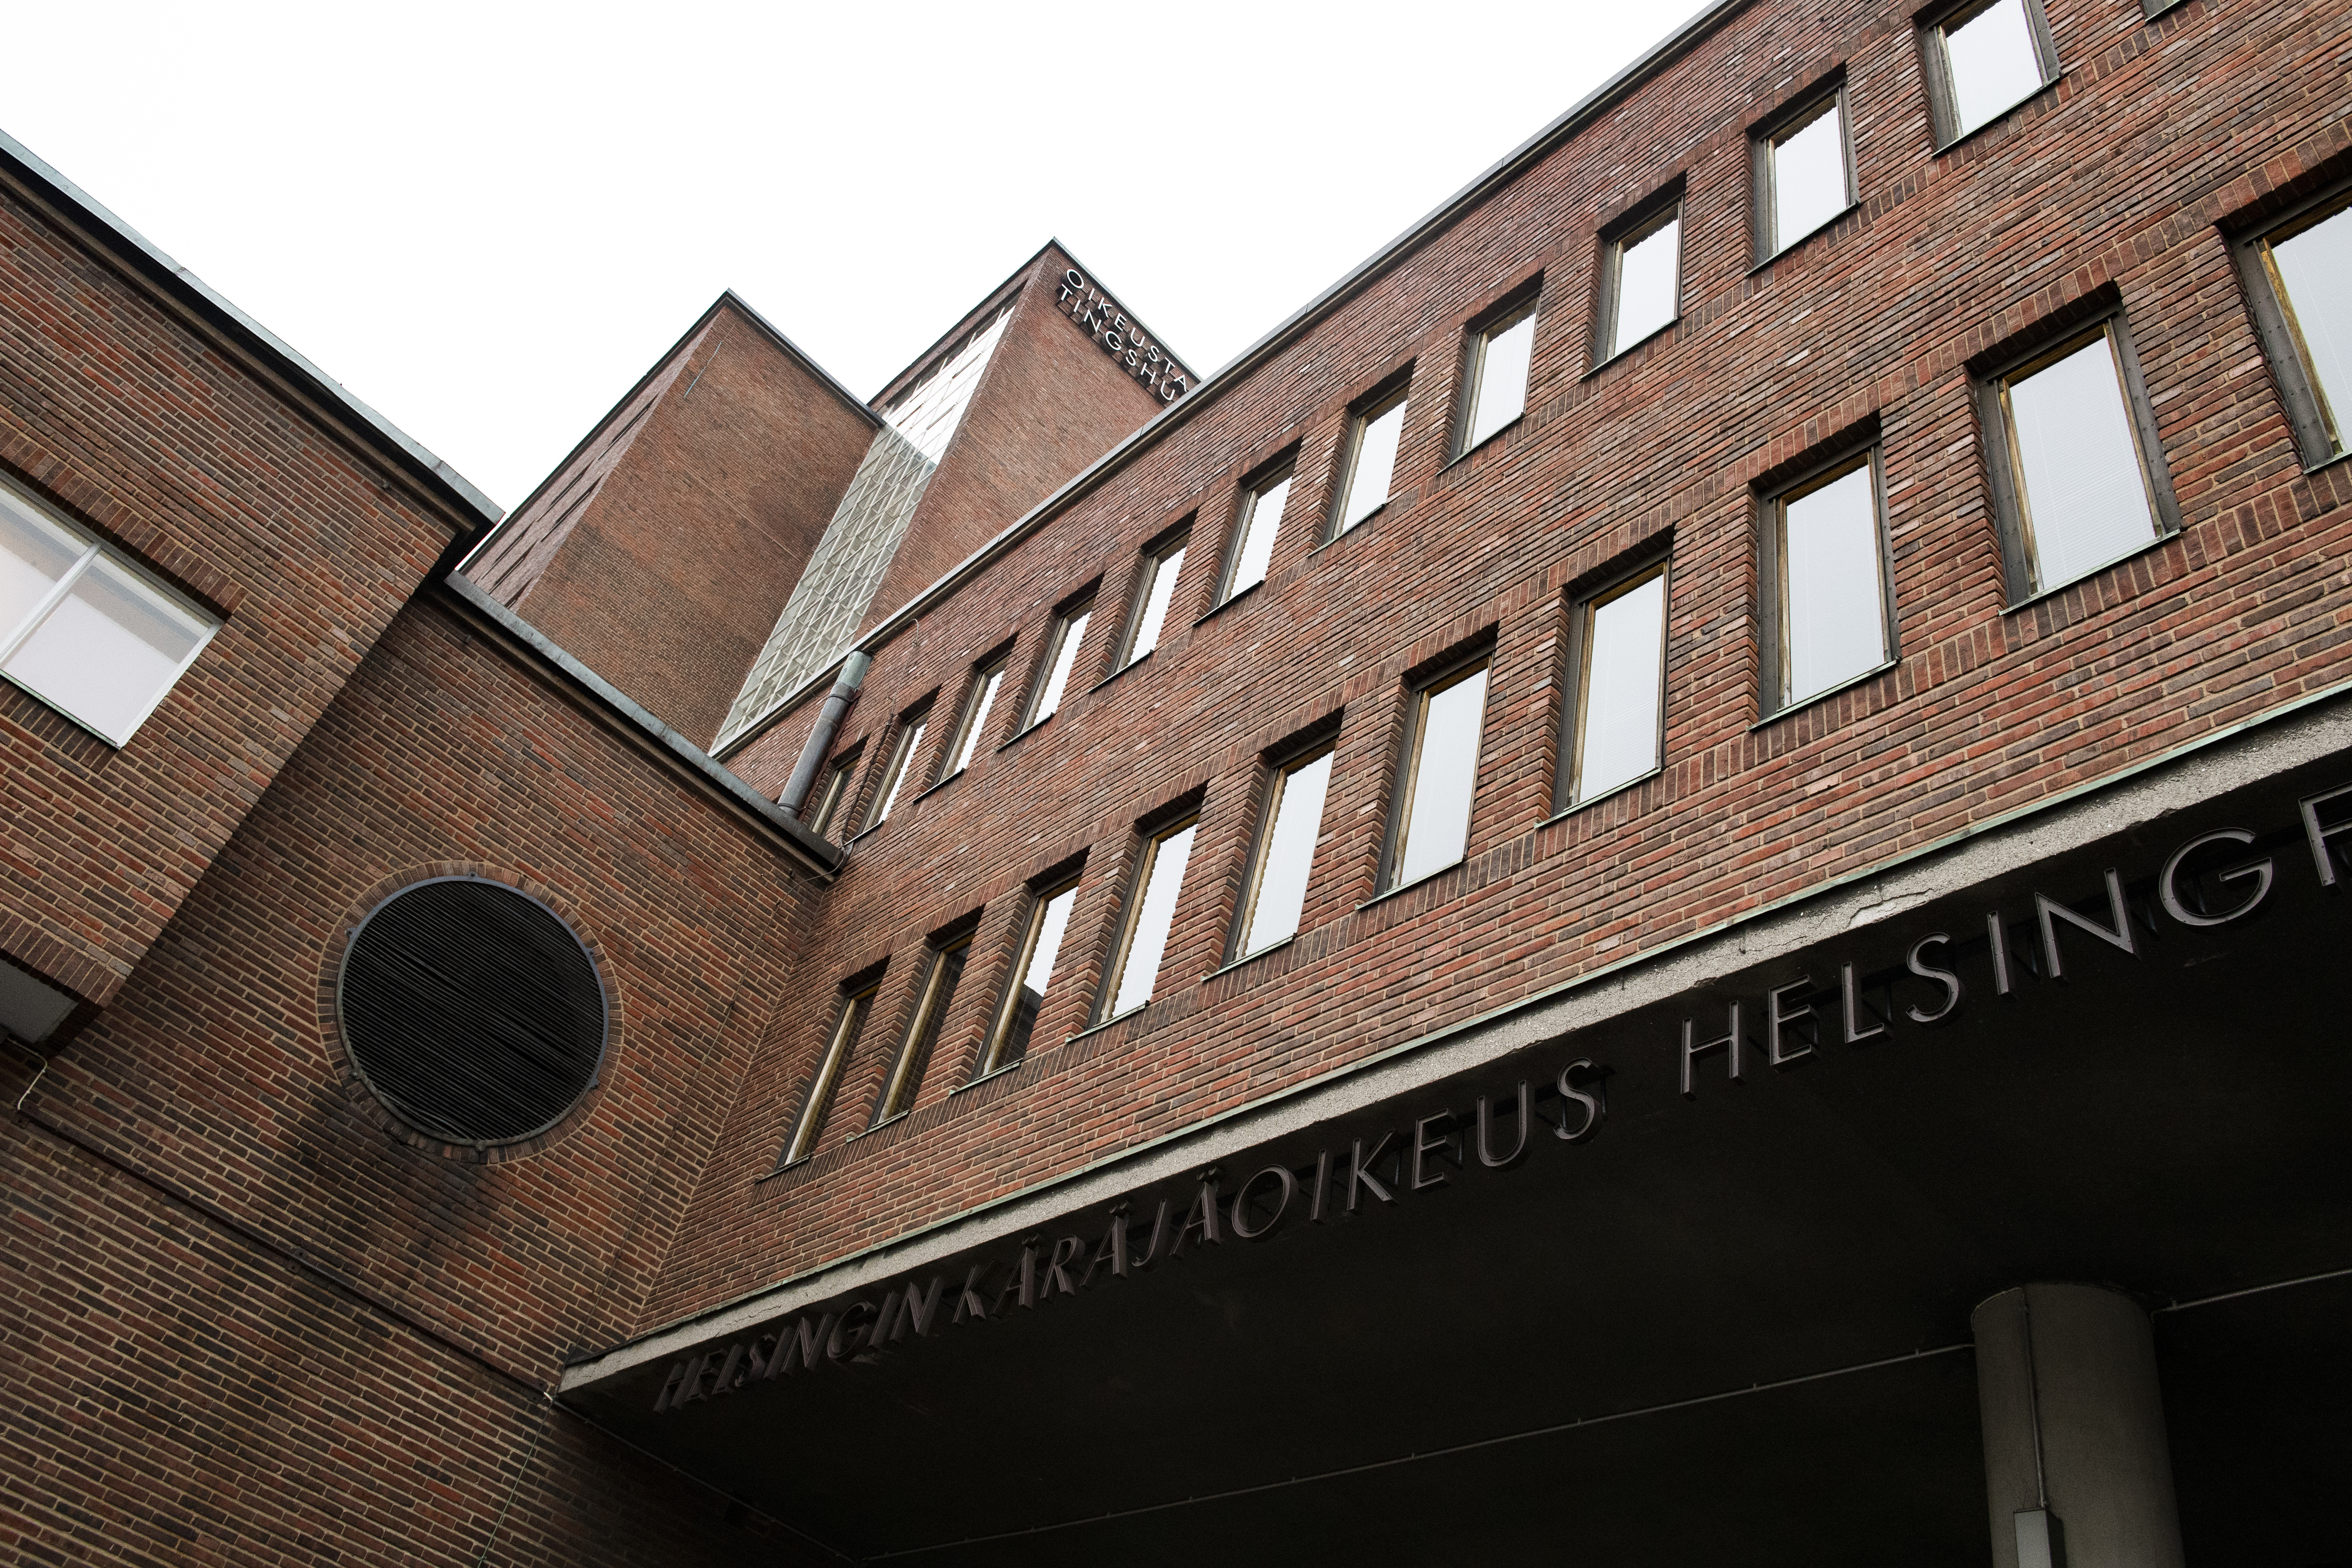 The court in Helsinki handles the child abduction trial behind closed doors